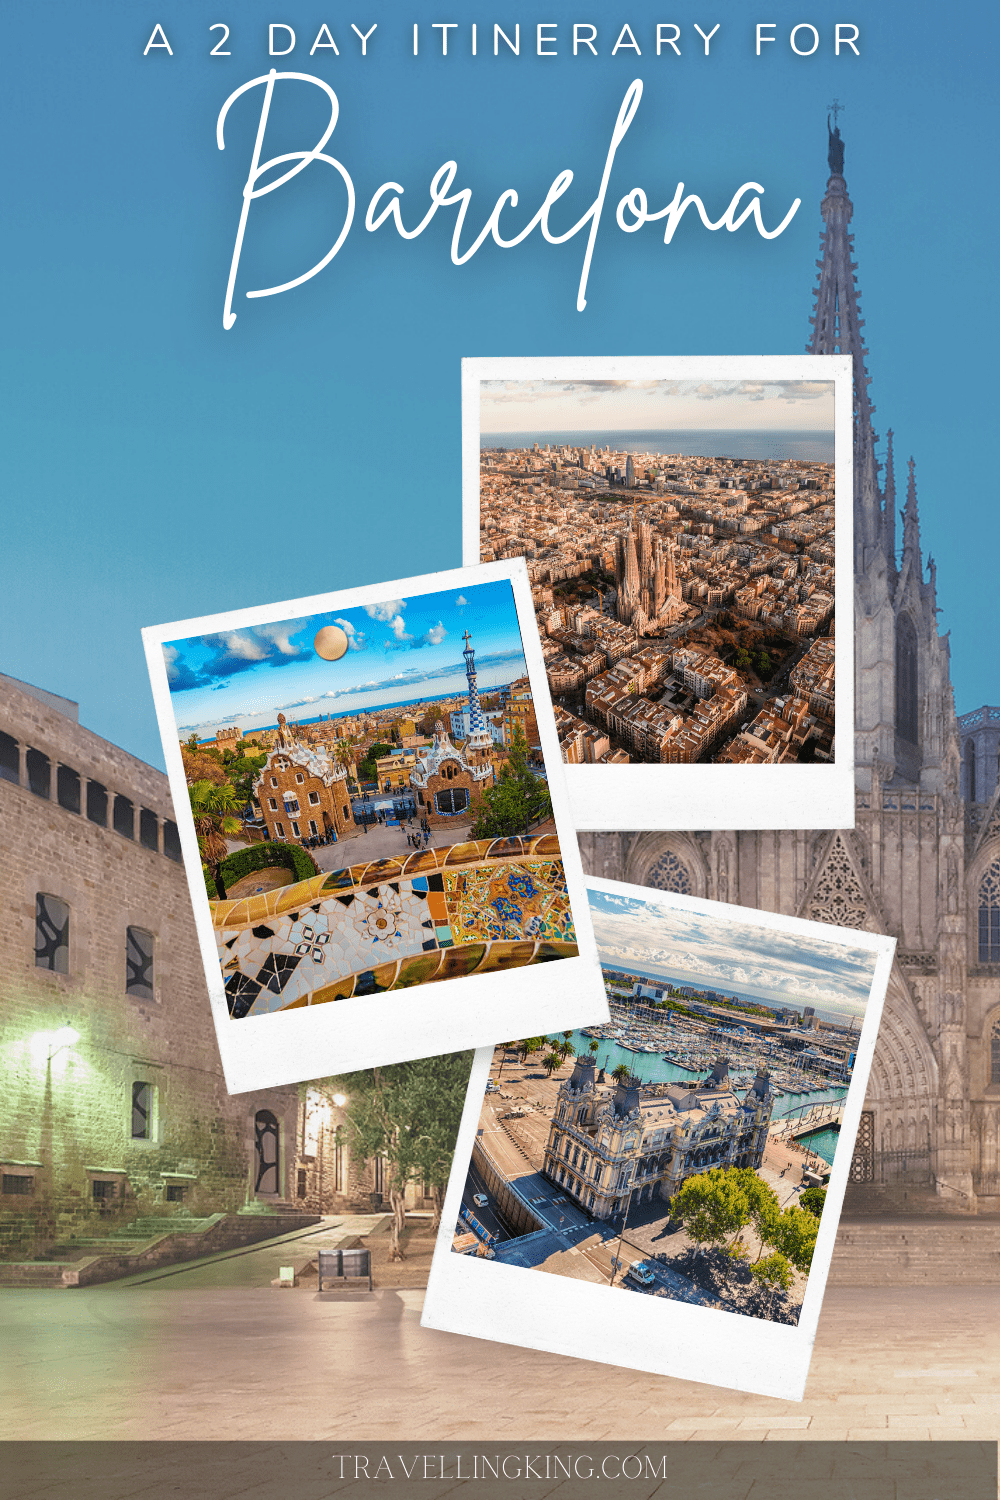 48 Hours in Barcelona - 2 Day Itinerary